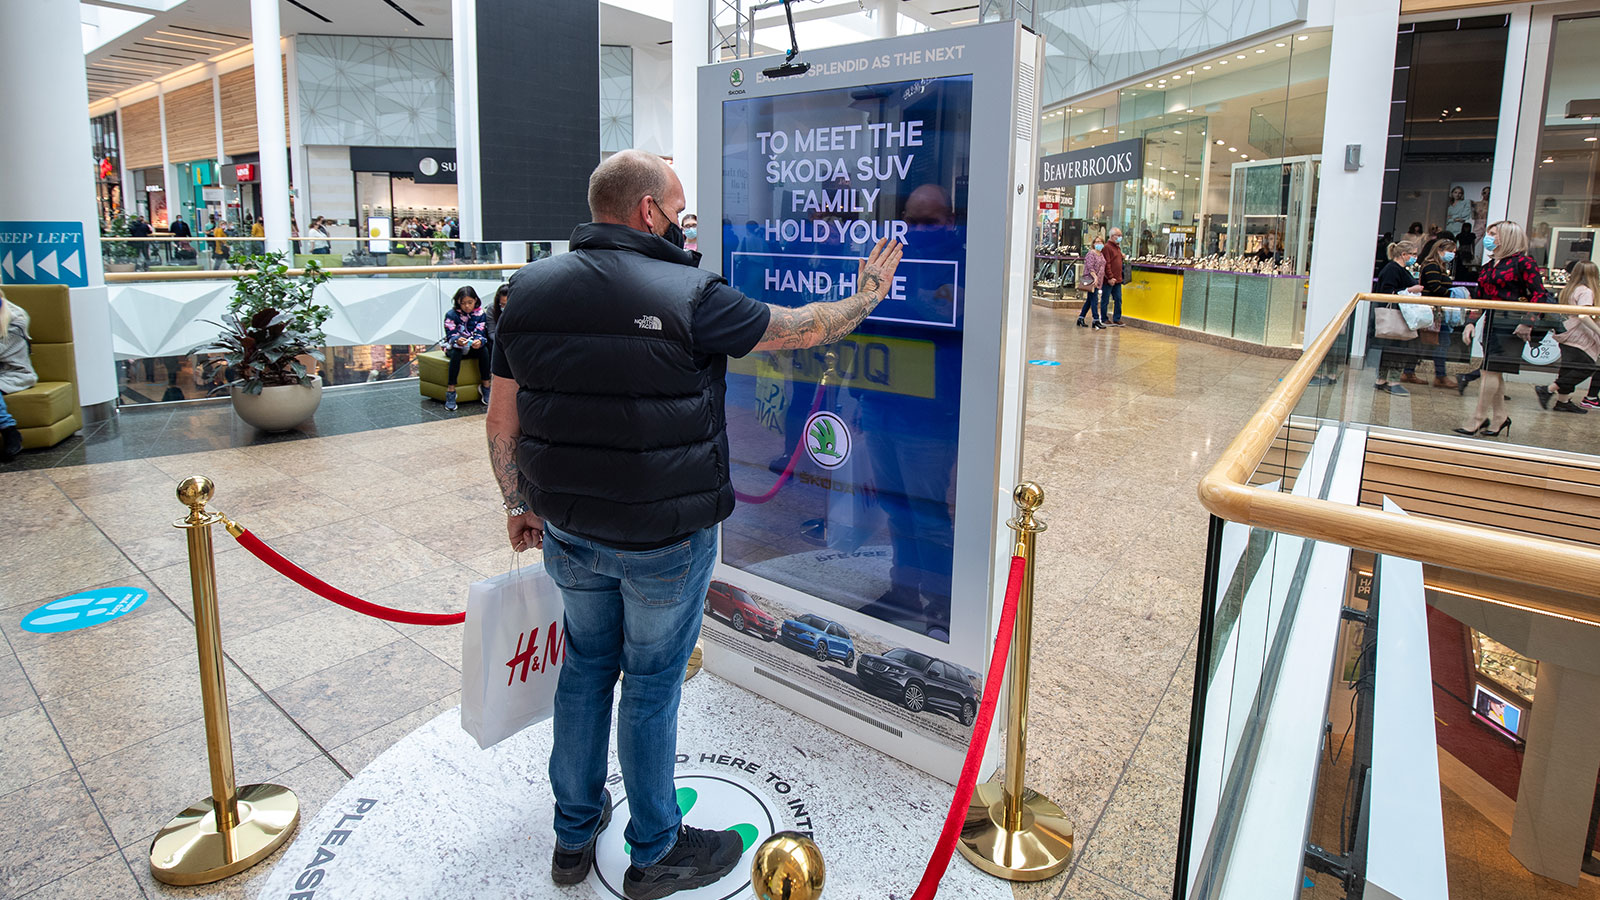 Skoda interactive digital out-of-home advertising screen with Ultraleap touchless technology